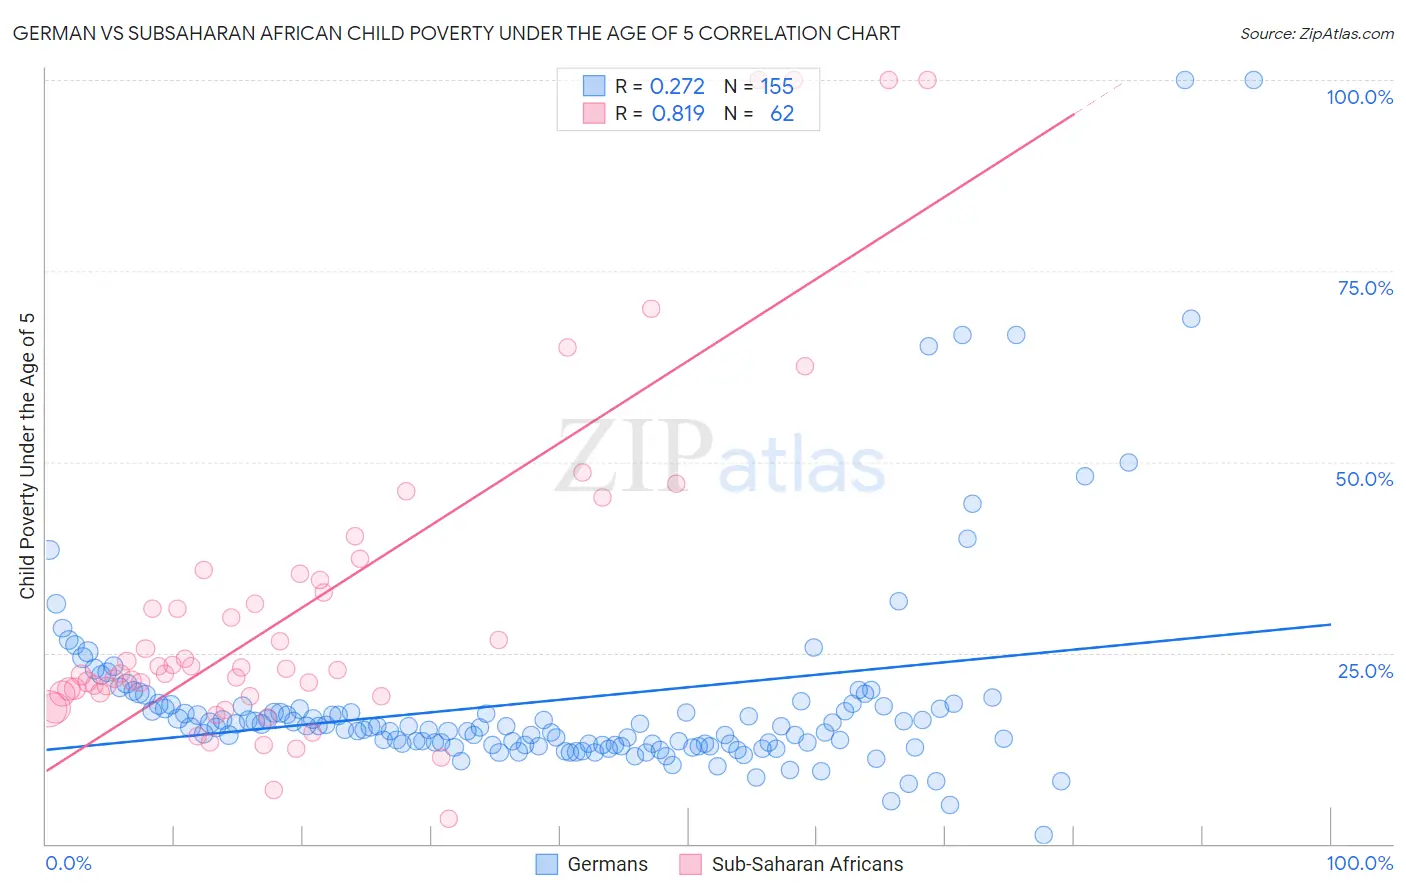 German vs Subsaharan African Child Poverty Under the Age of 5